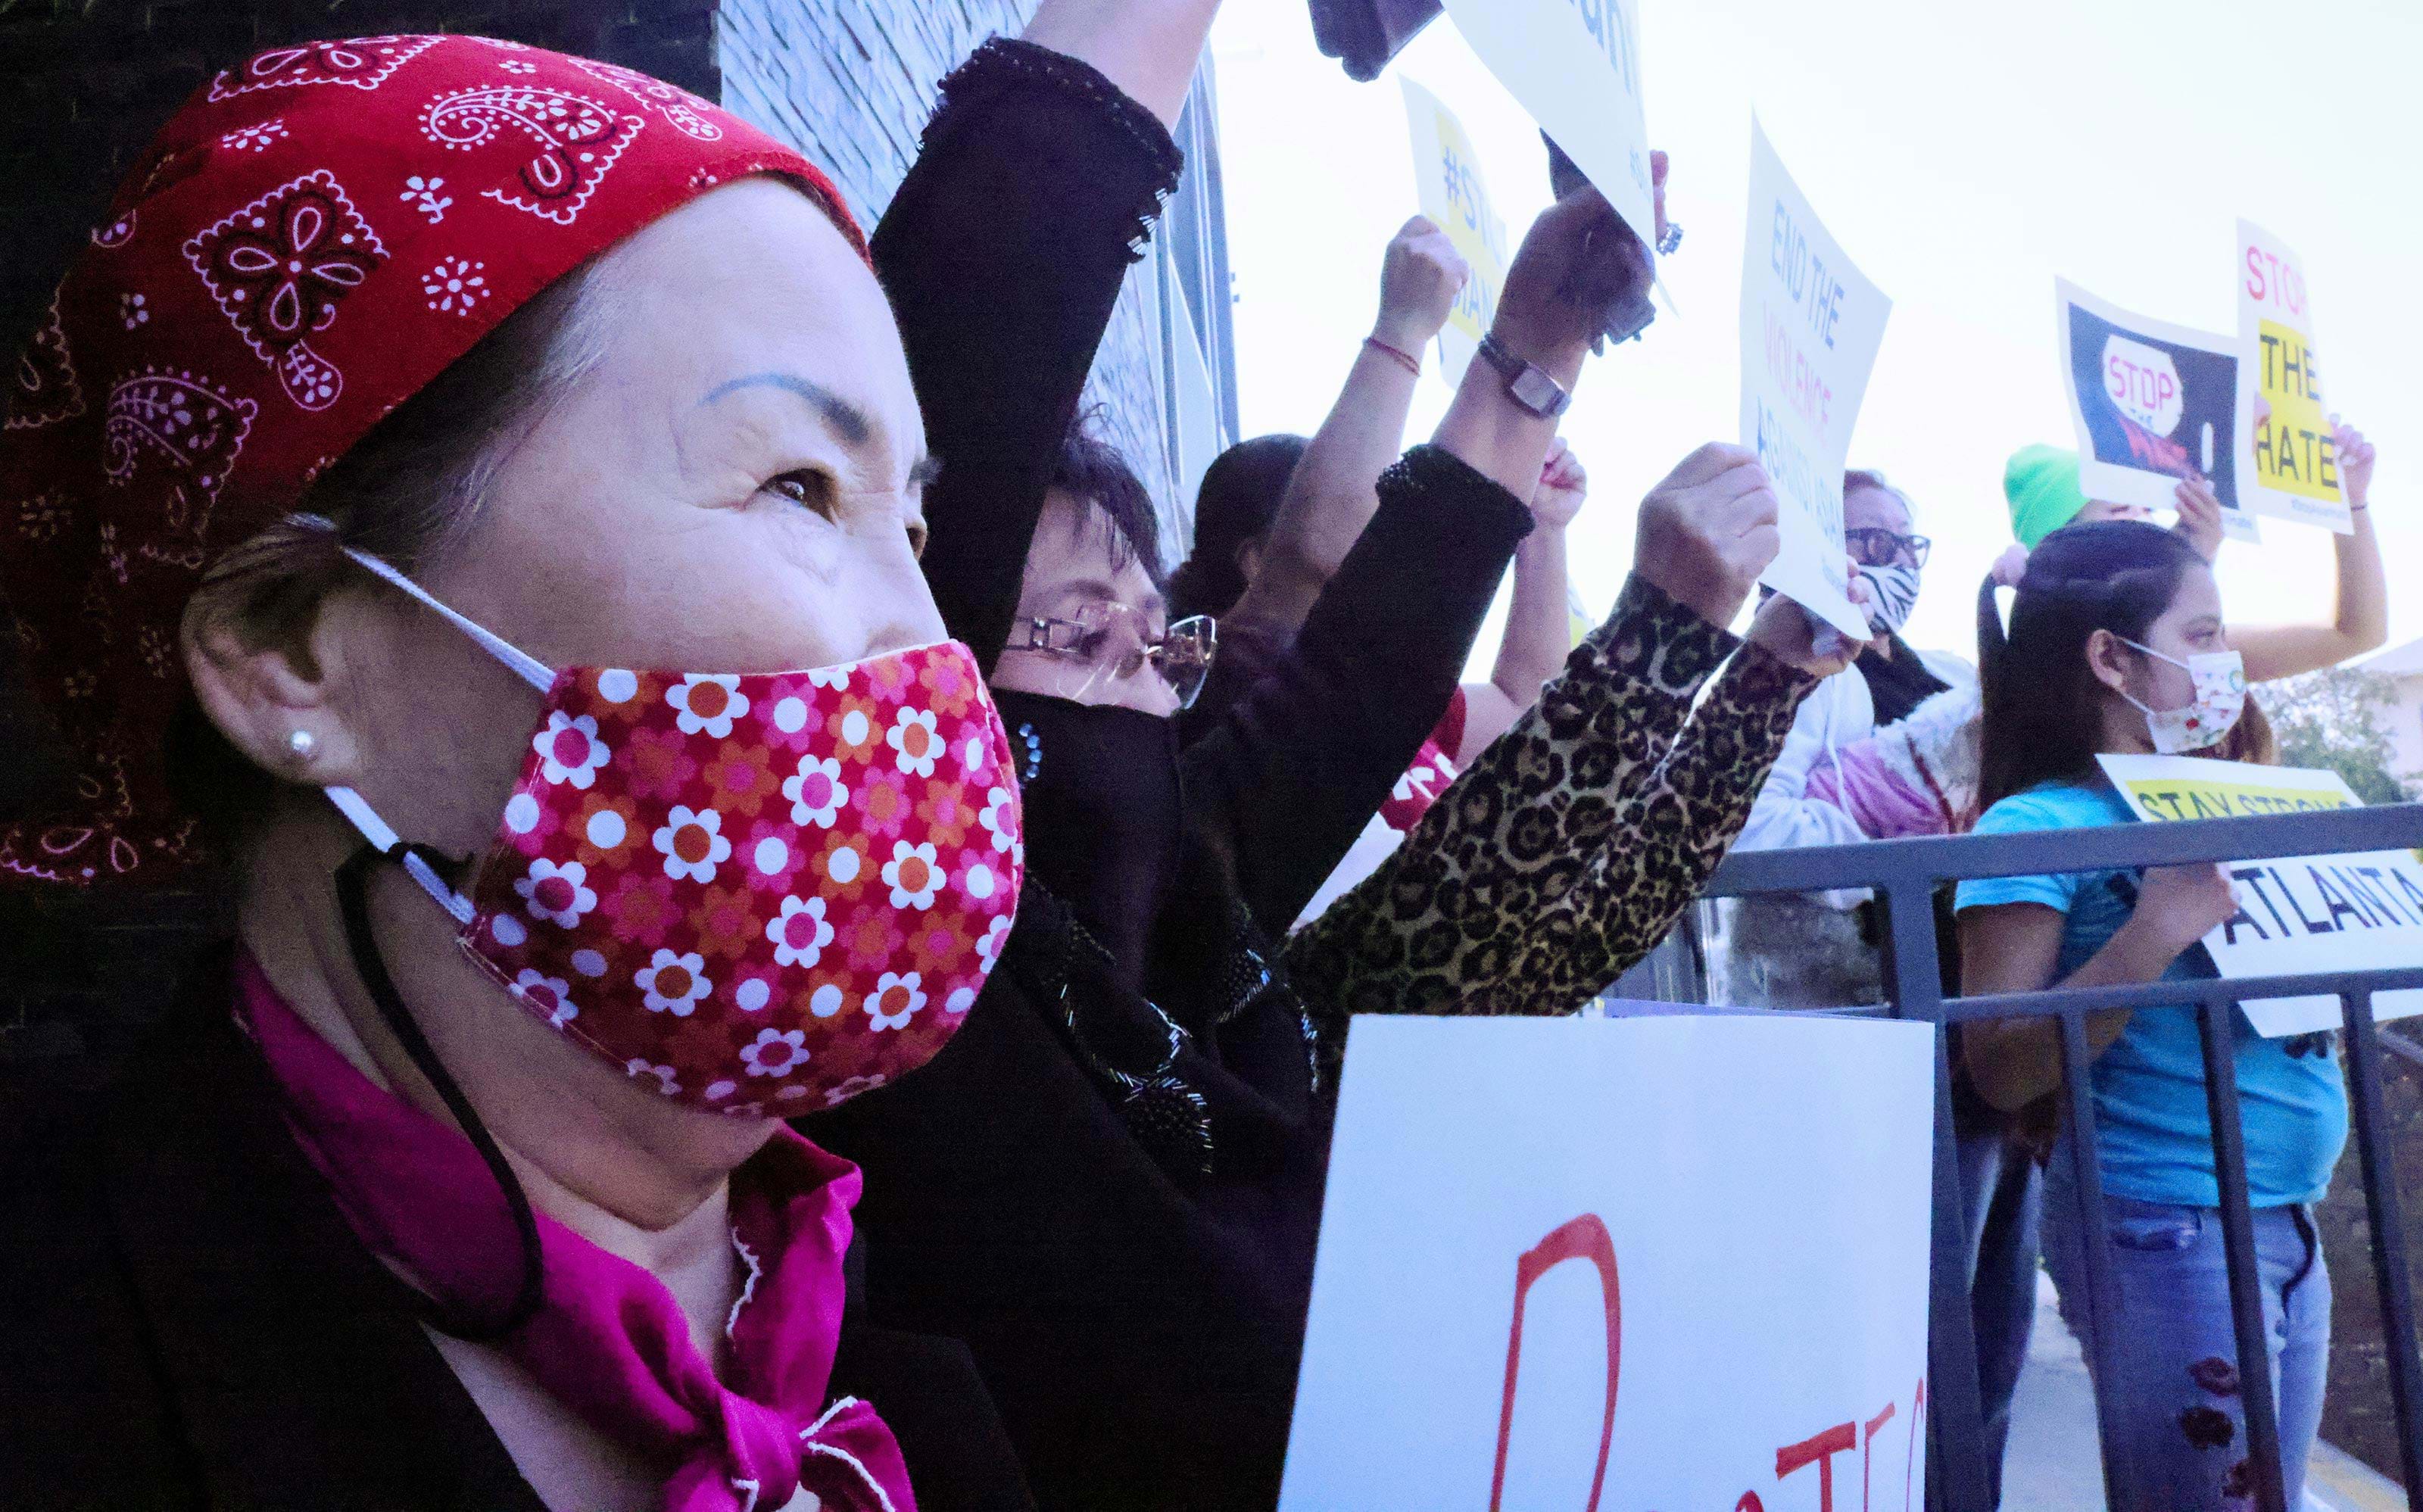 People holding signs protest hate crimes against Asian-American and Pacific Islander individuals. An individual wearing a red bandana and red mask holds a white sign and is in the foreground.